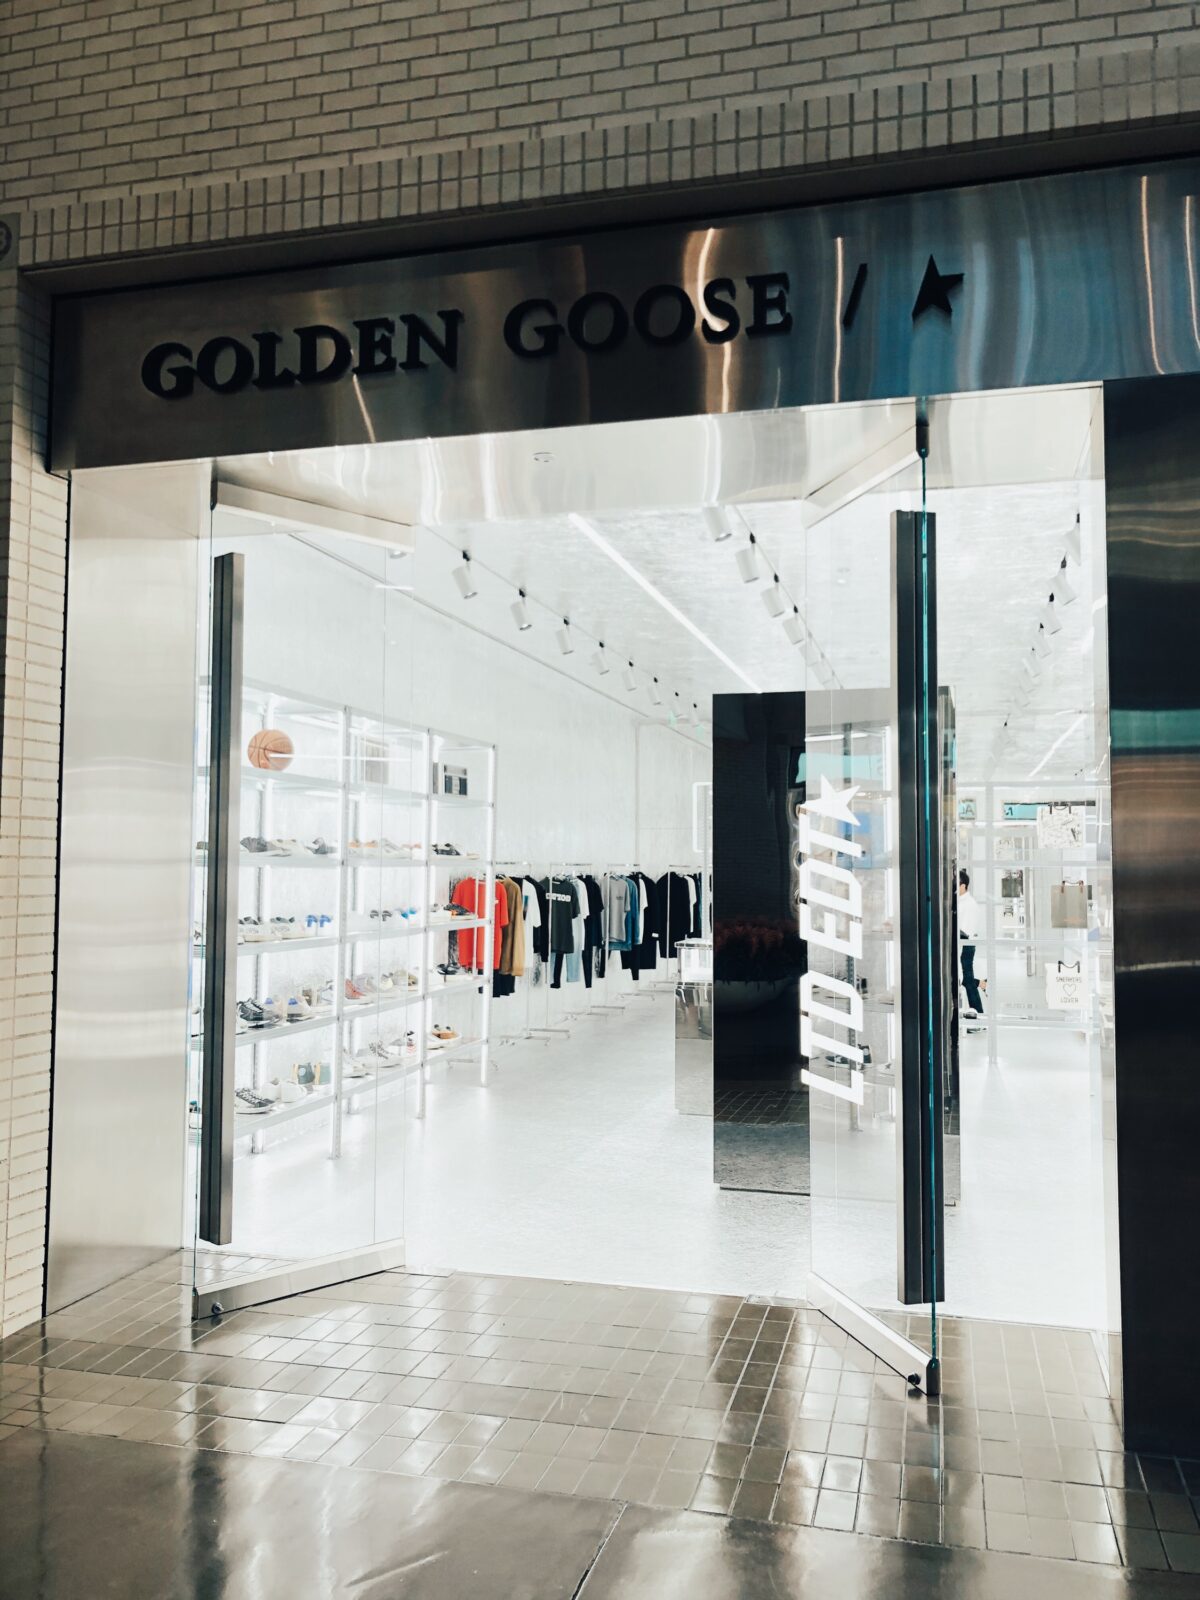 St 鍔 Korea Golden Goose Store Laces up at NorthPark Center – SMU Look